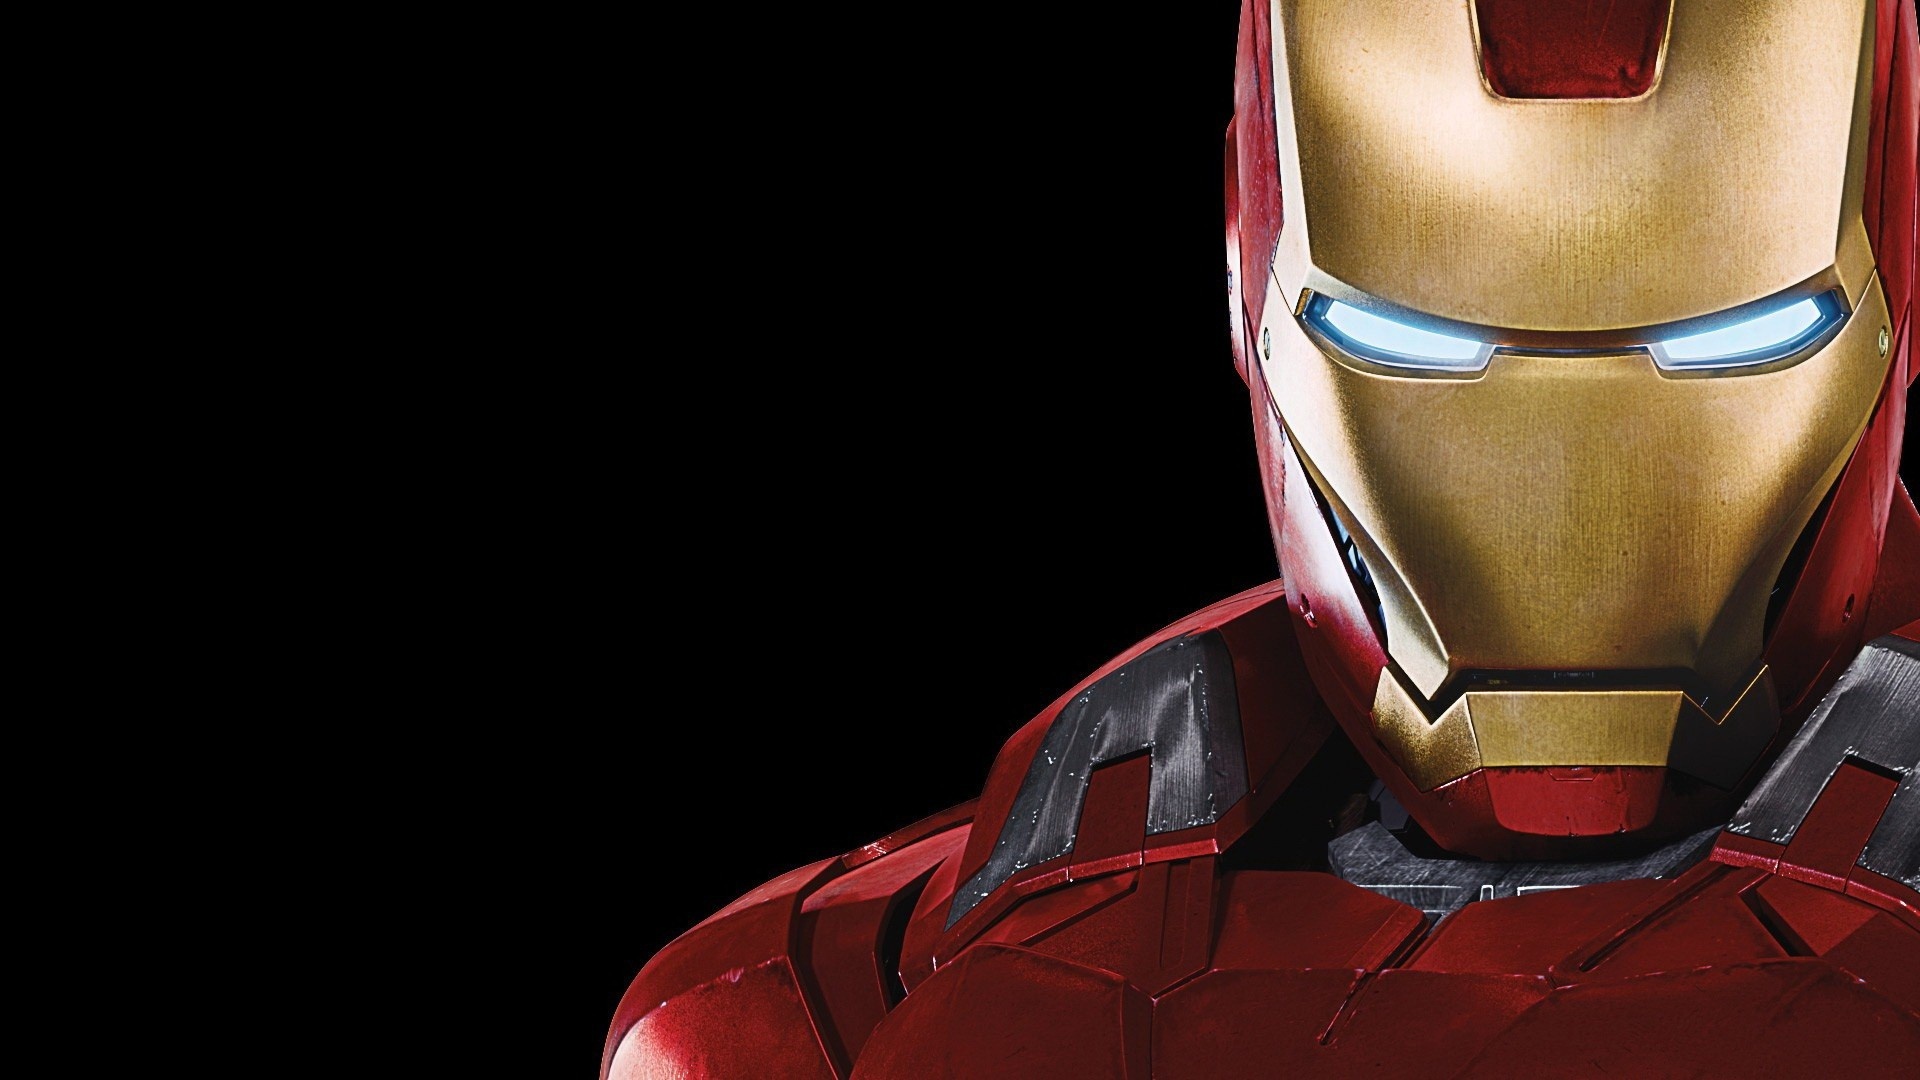 Iron Man: A master engineer, Tony Stark builds a mechanized suit of armor and becomes the superhero. 1920x1080 Full HD Wallpaper.